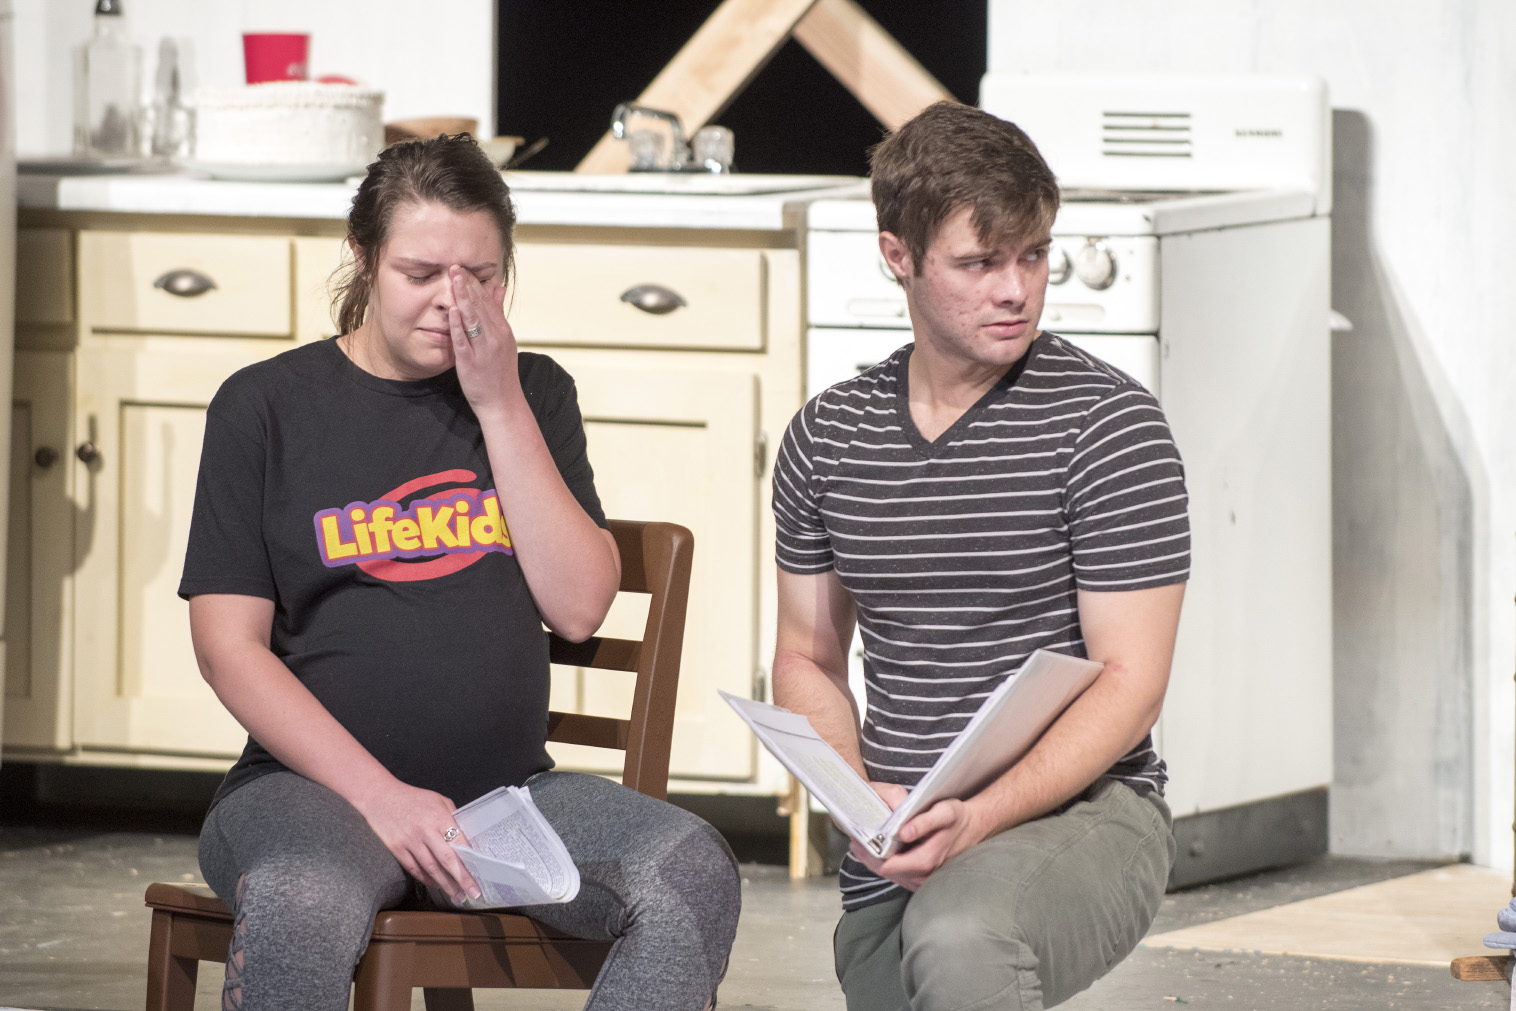 Stella, played by Caitlin Ferguson, cries as Stanley, played by Michael Michel, looks away during rehearsal of A Streetcar Named Desire, which runs on NE Oct. 11-14.